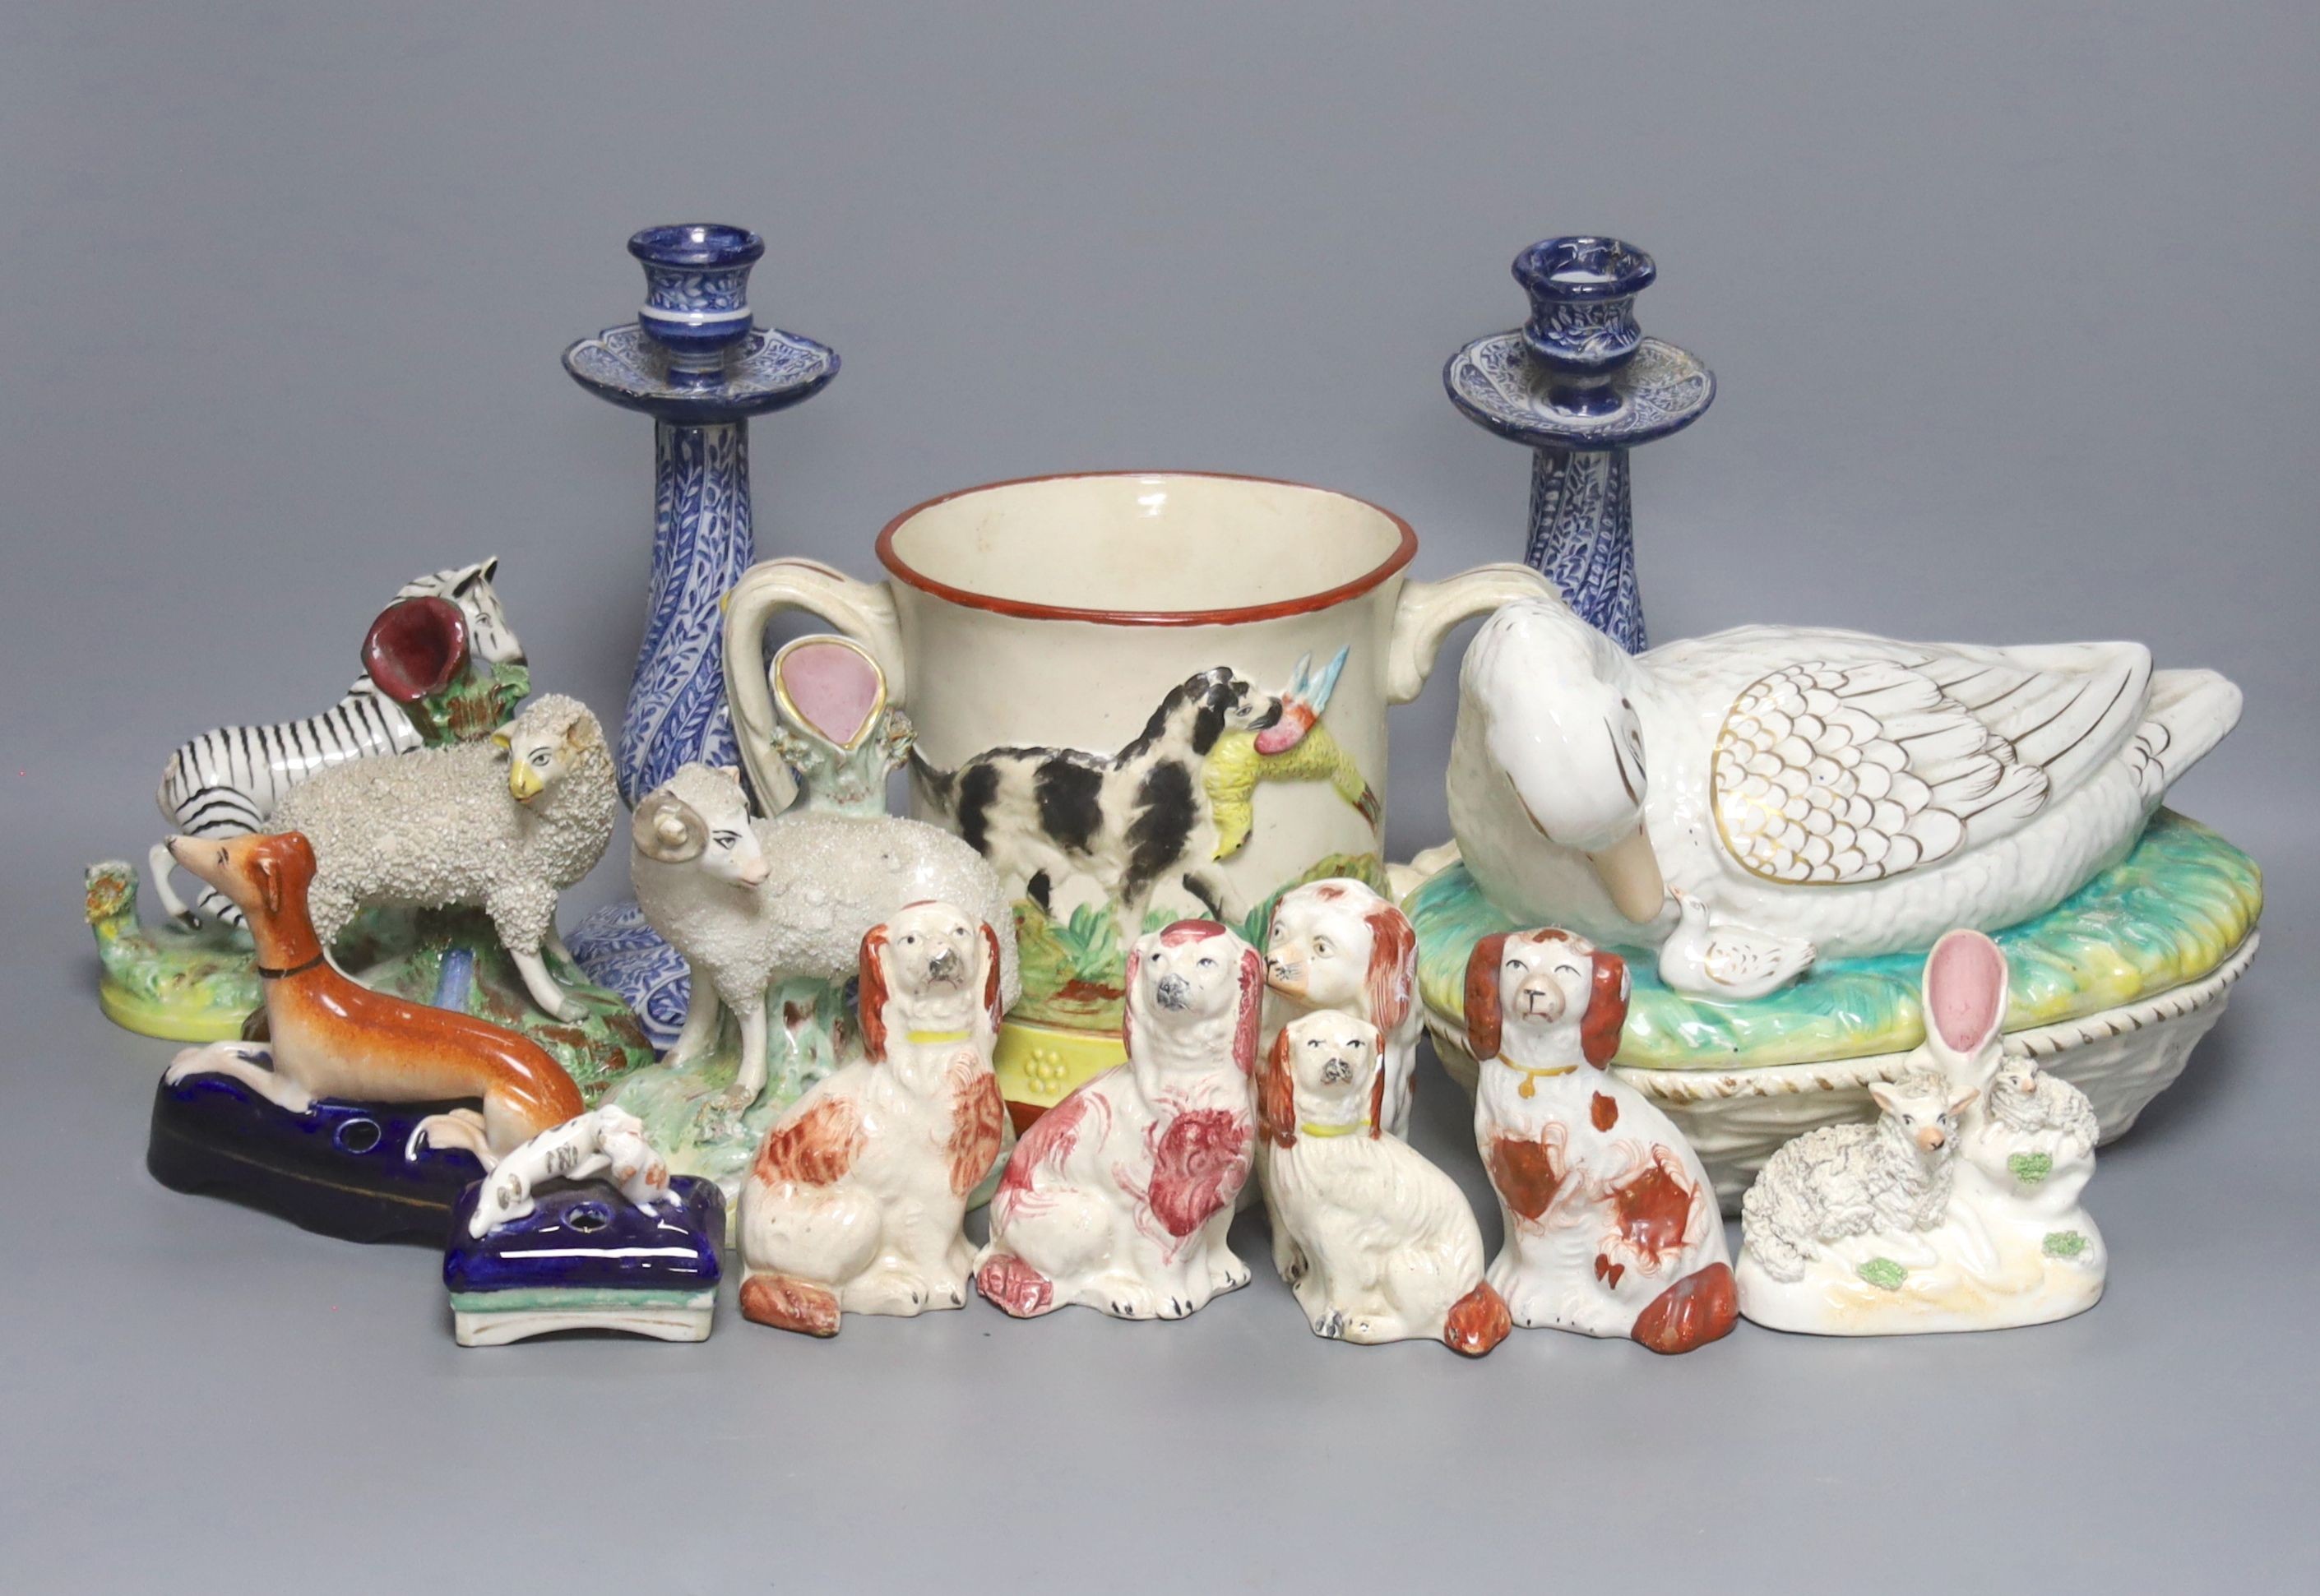 A Staffordshire pottery ‘duck’ tureen and cover, 23cm, a pair of faience candlesticks, Staffordshire figures of dogs, sheep and a zebra and a two handled loving mug